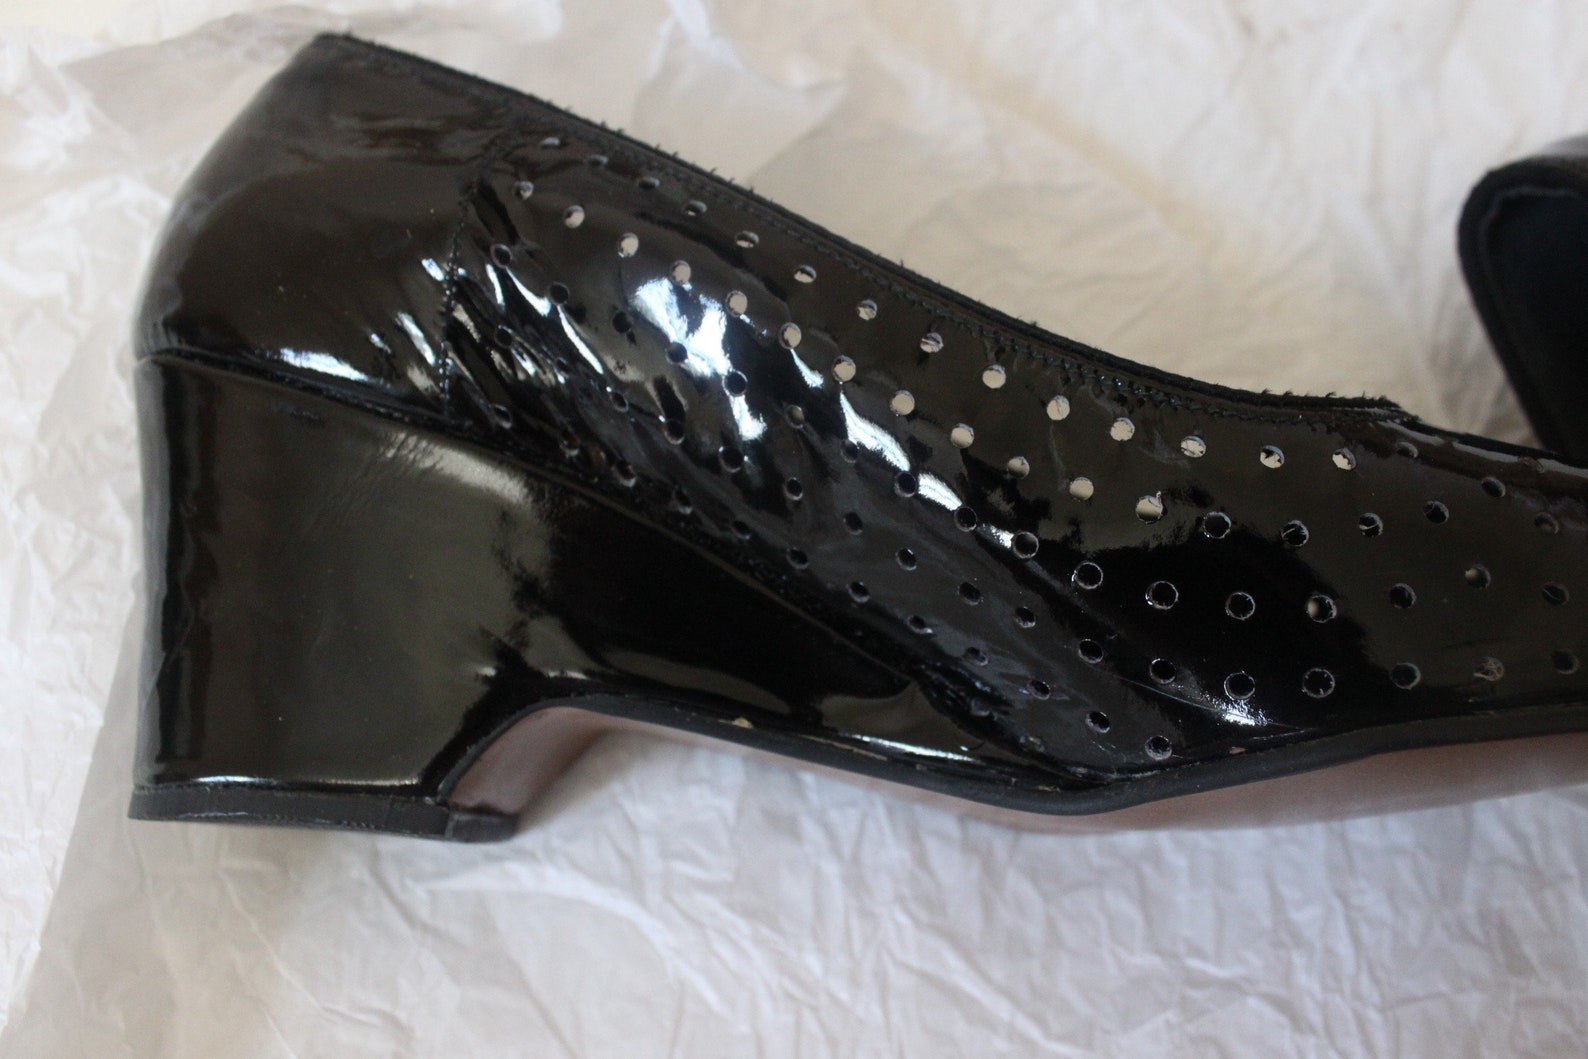 1960s Genuine Patent Leather Shiny Black Perforated Wedge Heel - Etsy